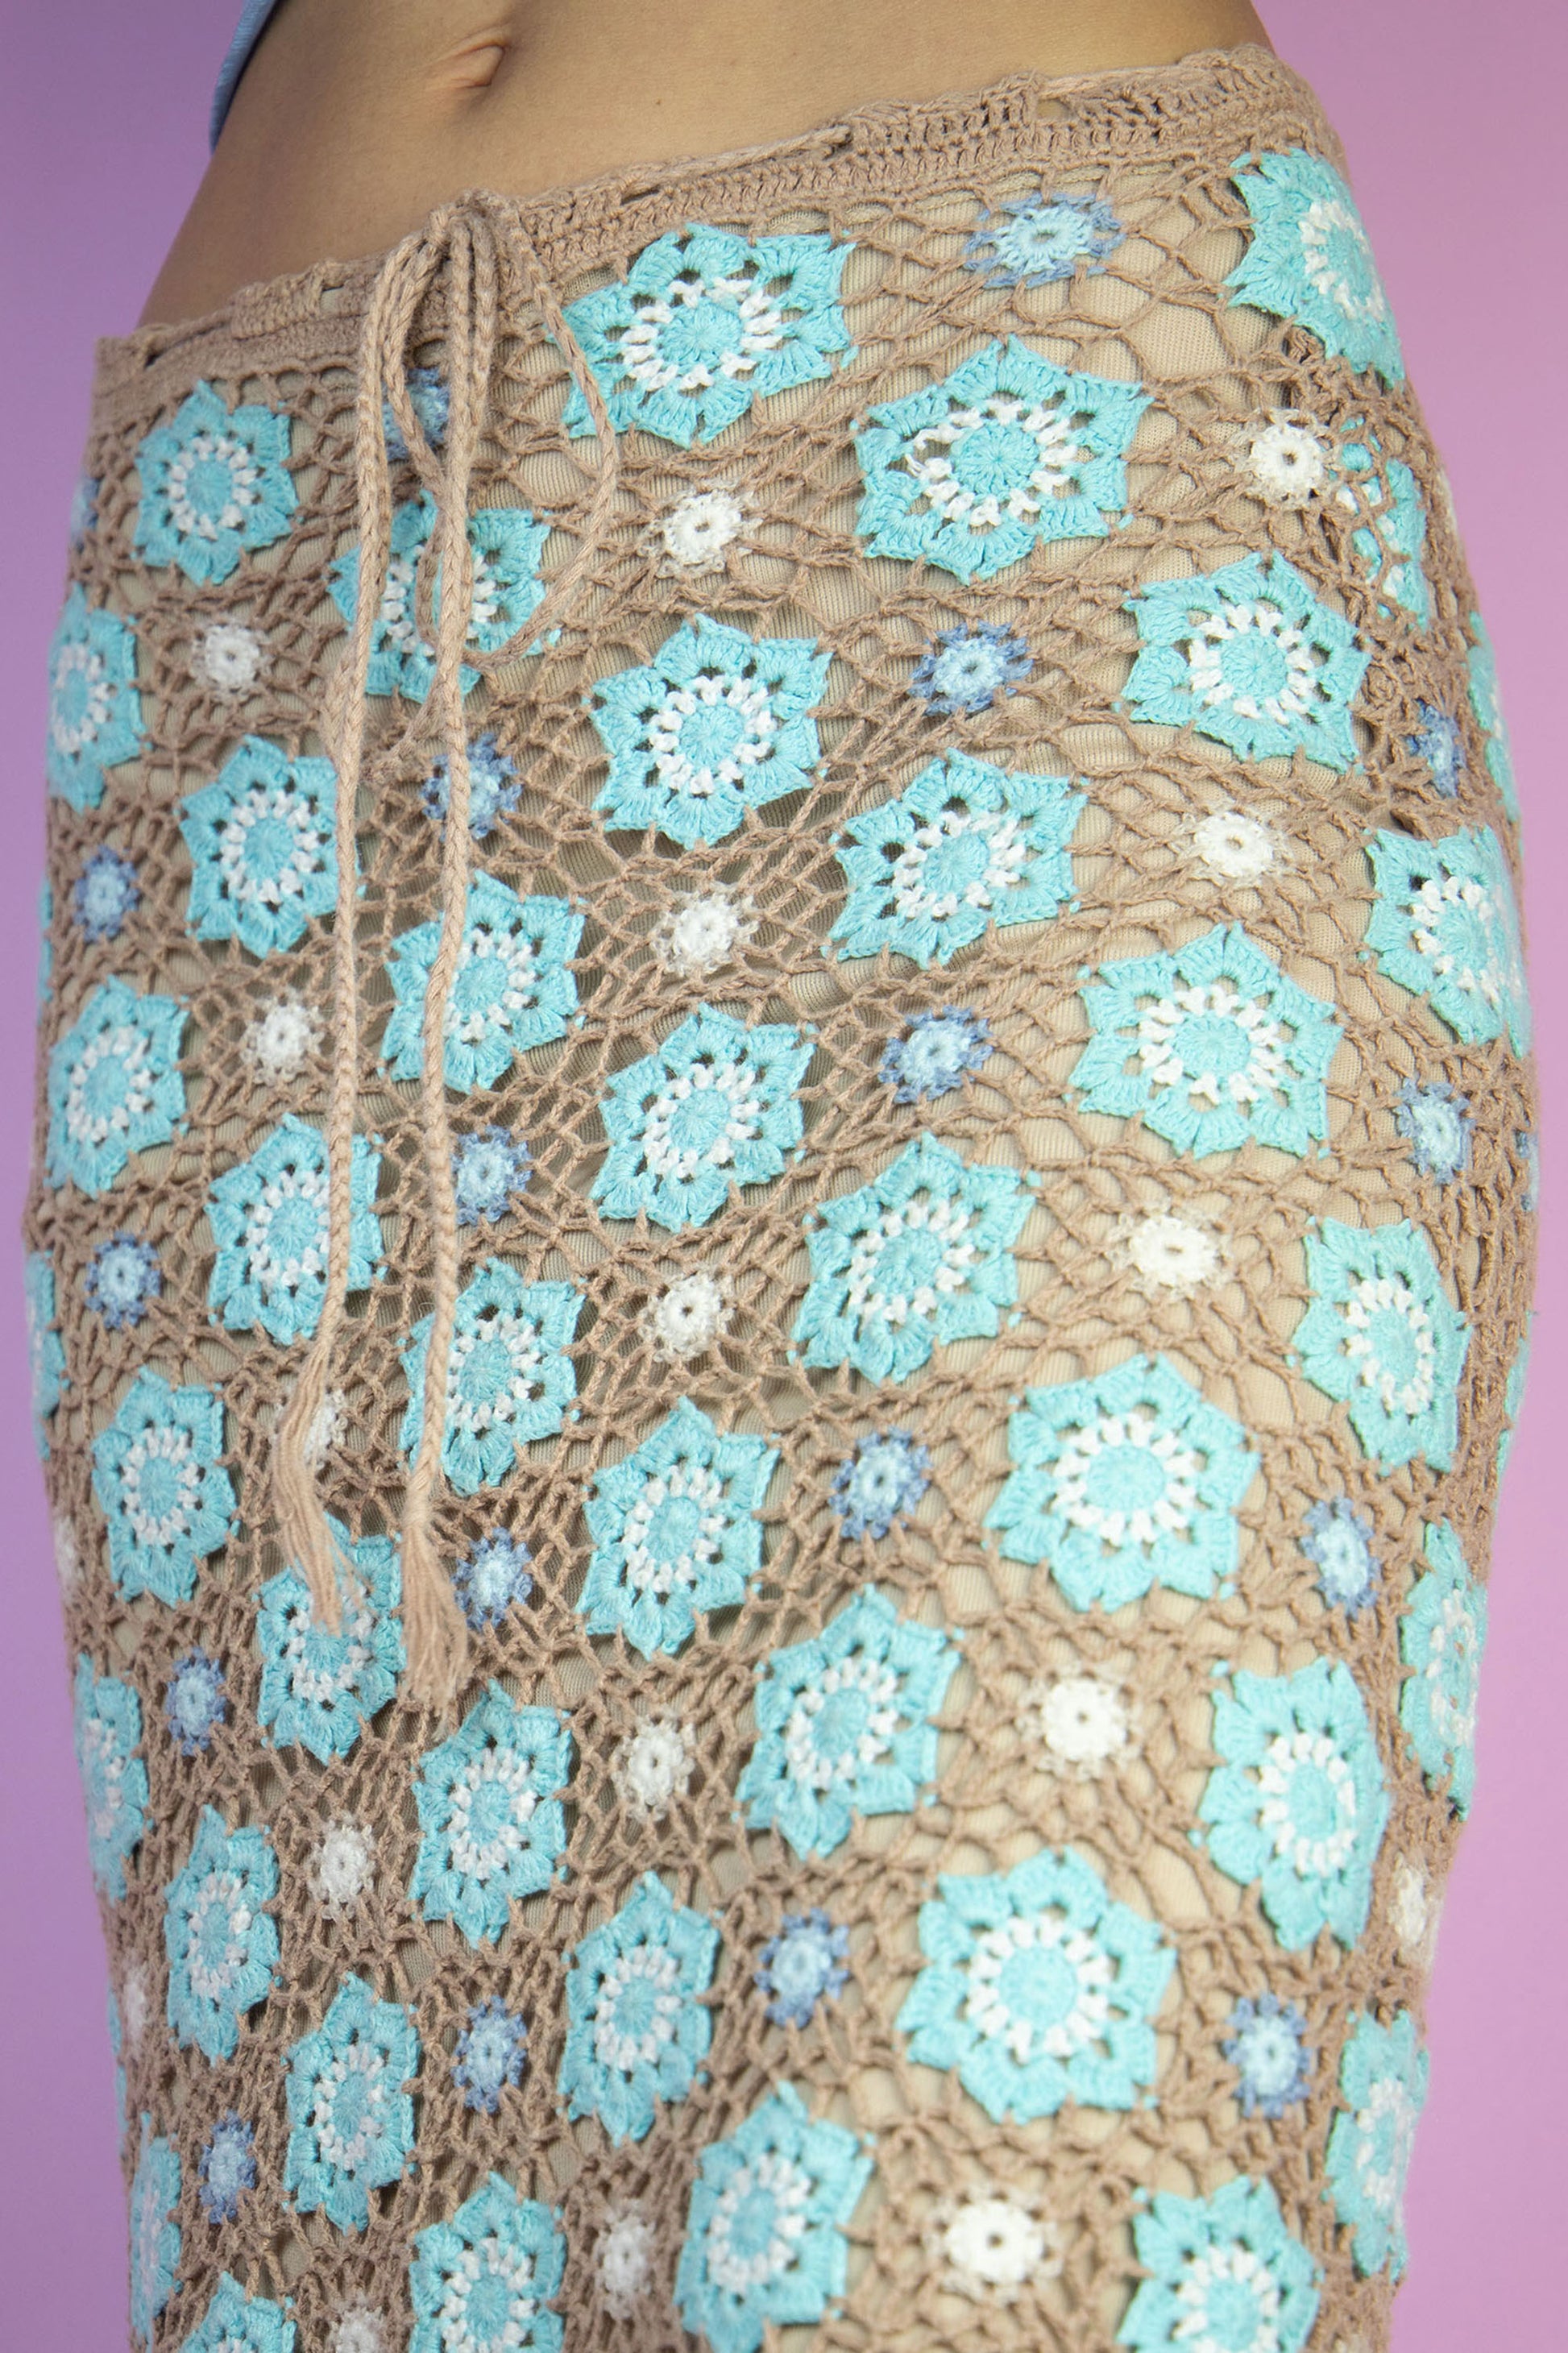 The Y2K Floral Crochet Knit Skirt is a vintage brown and blue knitted tie-front skirt. Boho 2000s summer mini skirt.